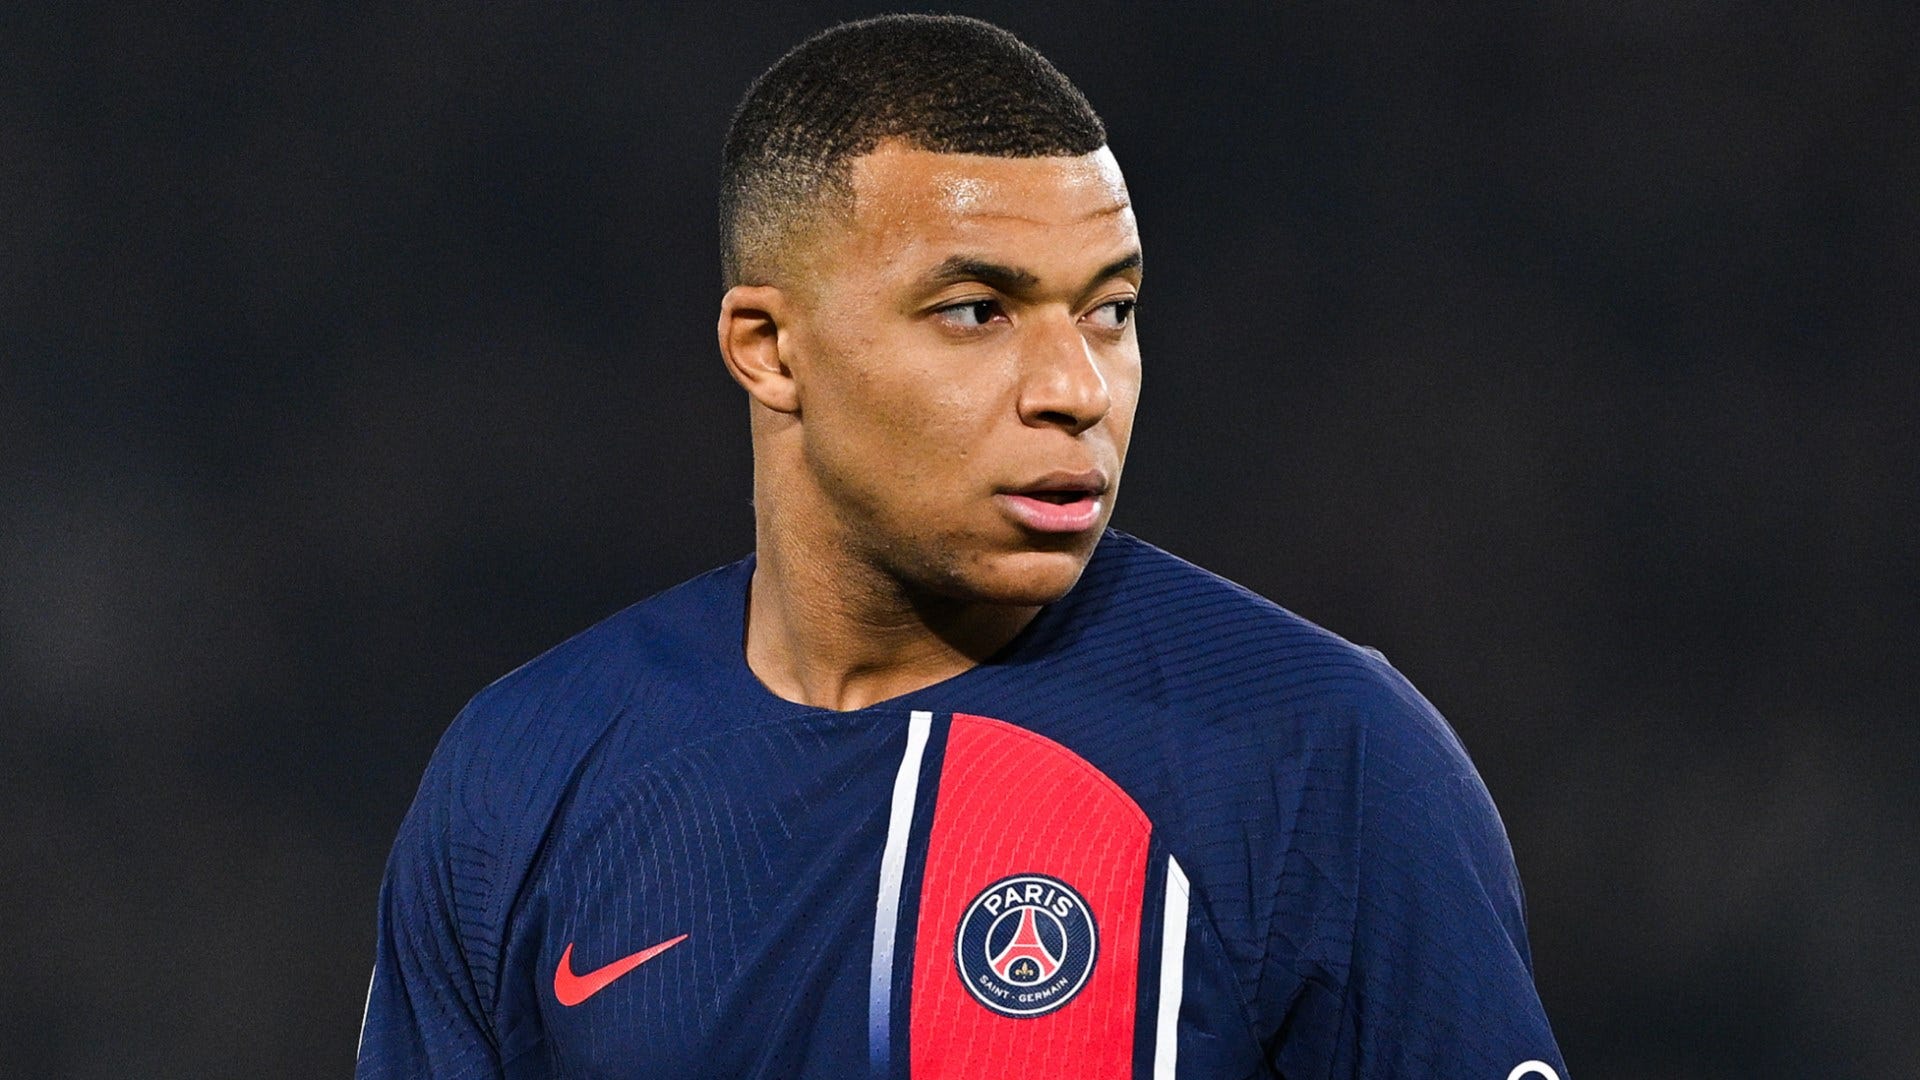 Kylian Mbappe told what he needs to do to succeed Lionel Messi and lift the Ballon d’Or by PSG boss Luis Enrique | Goal.com US